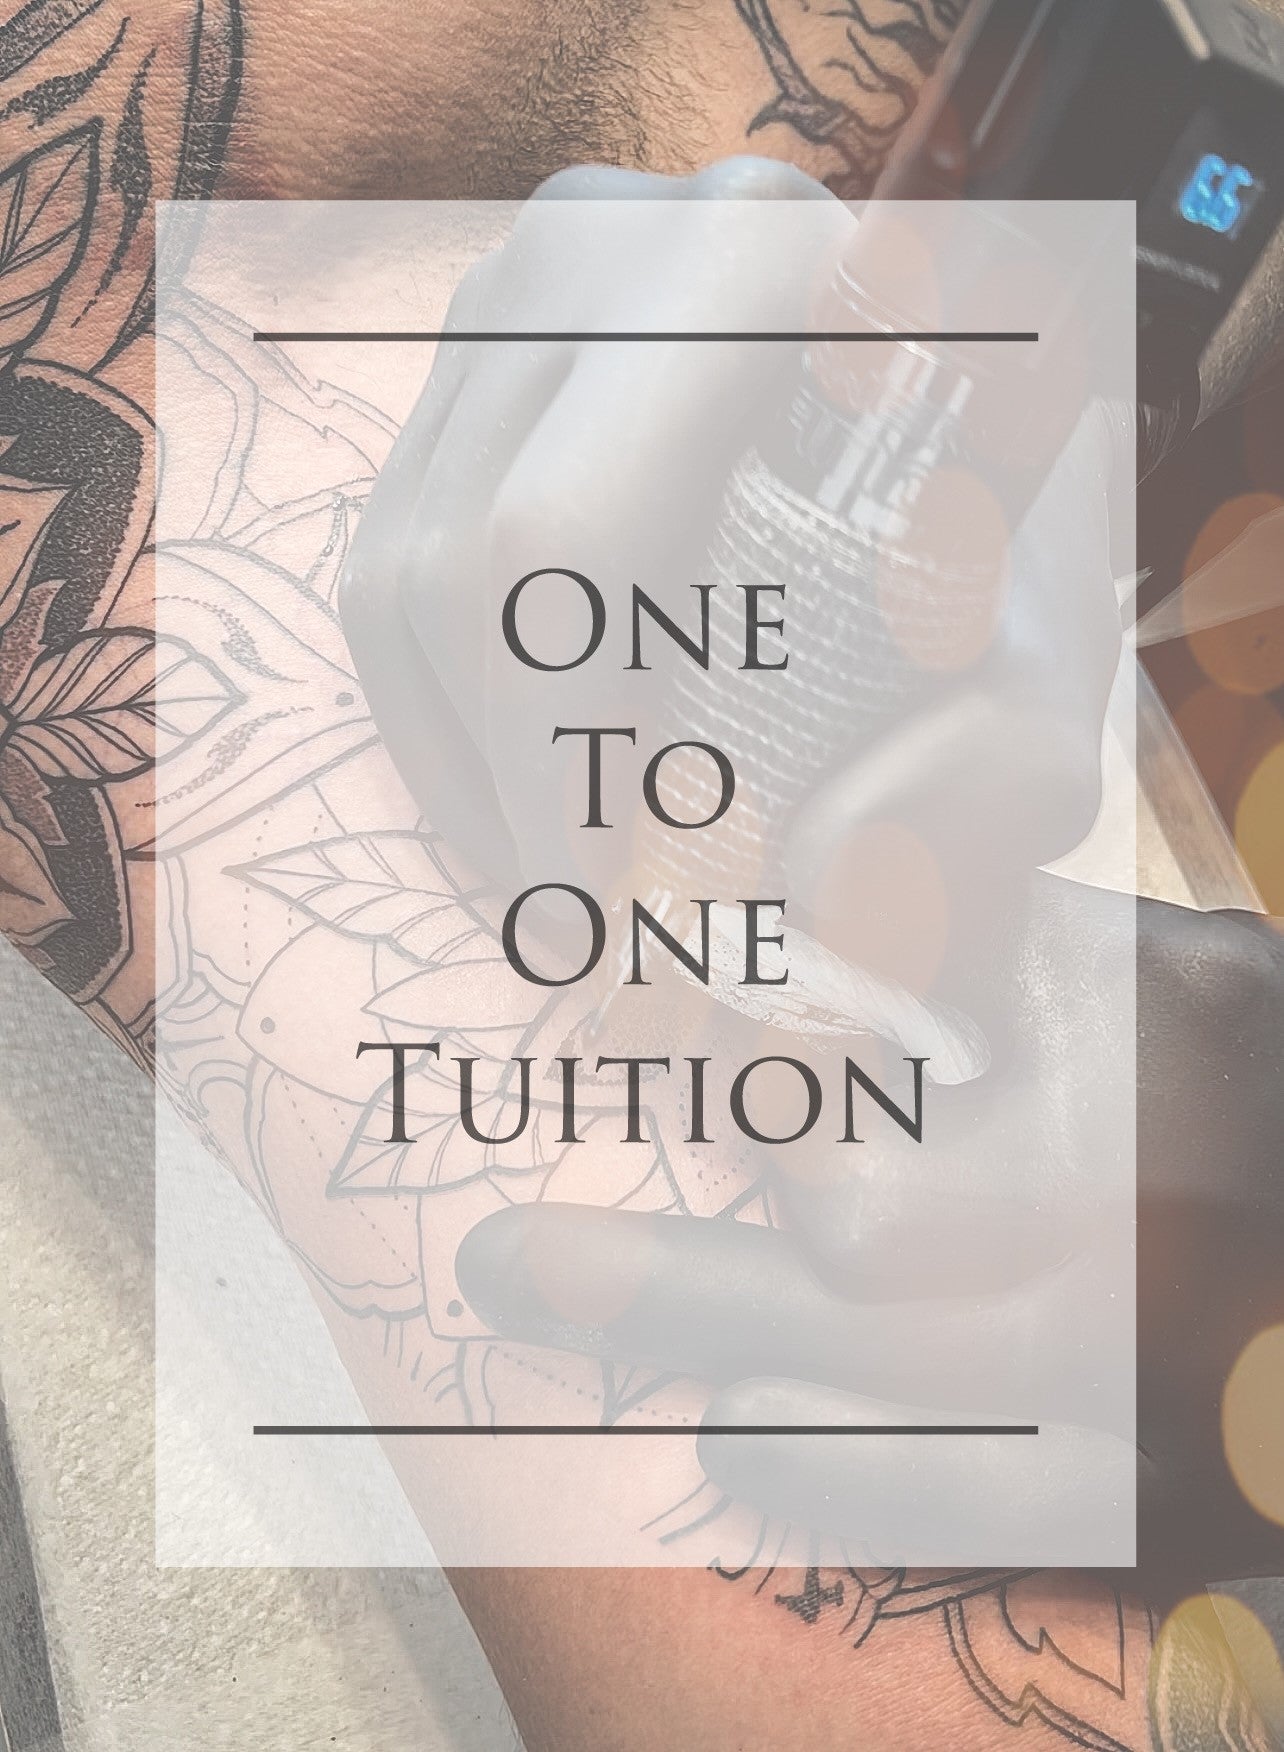 DEPOSIT One to one tuition